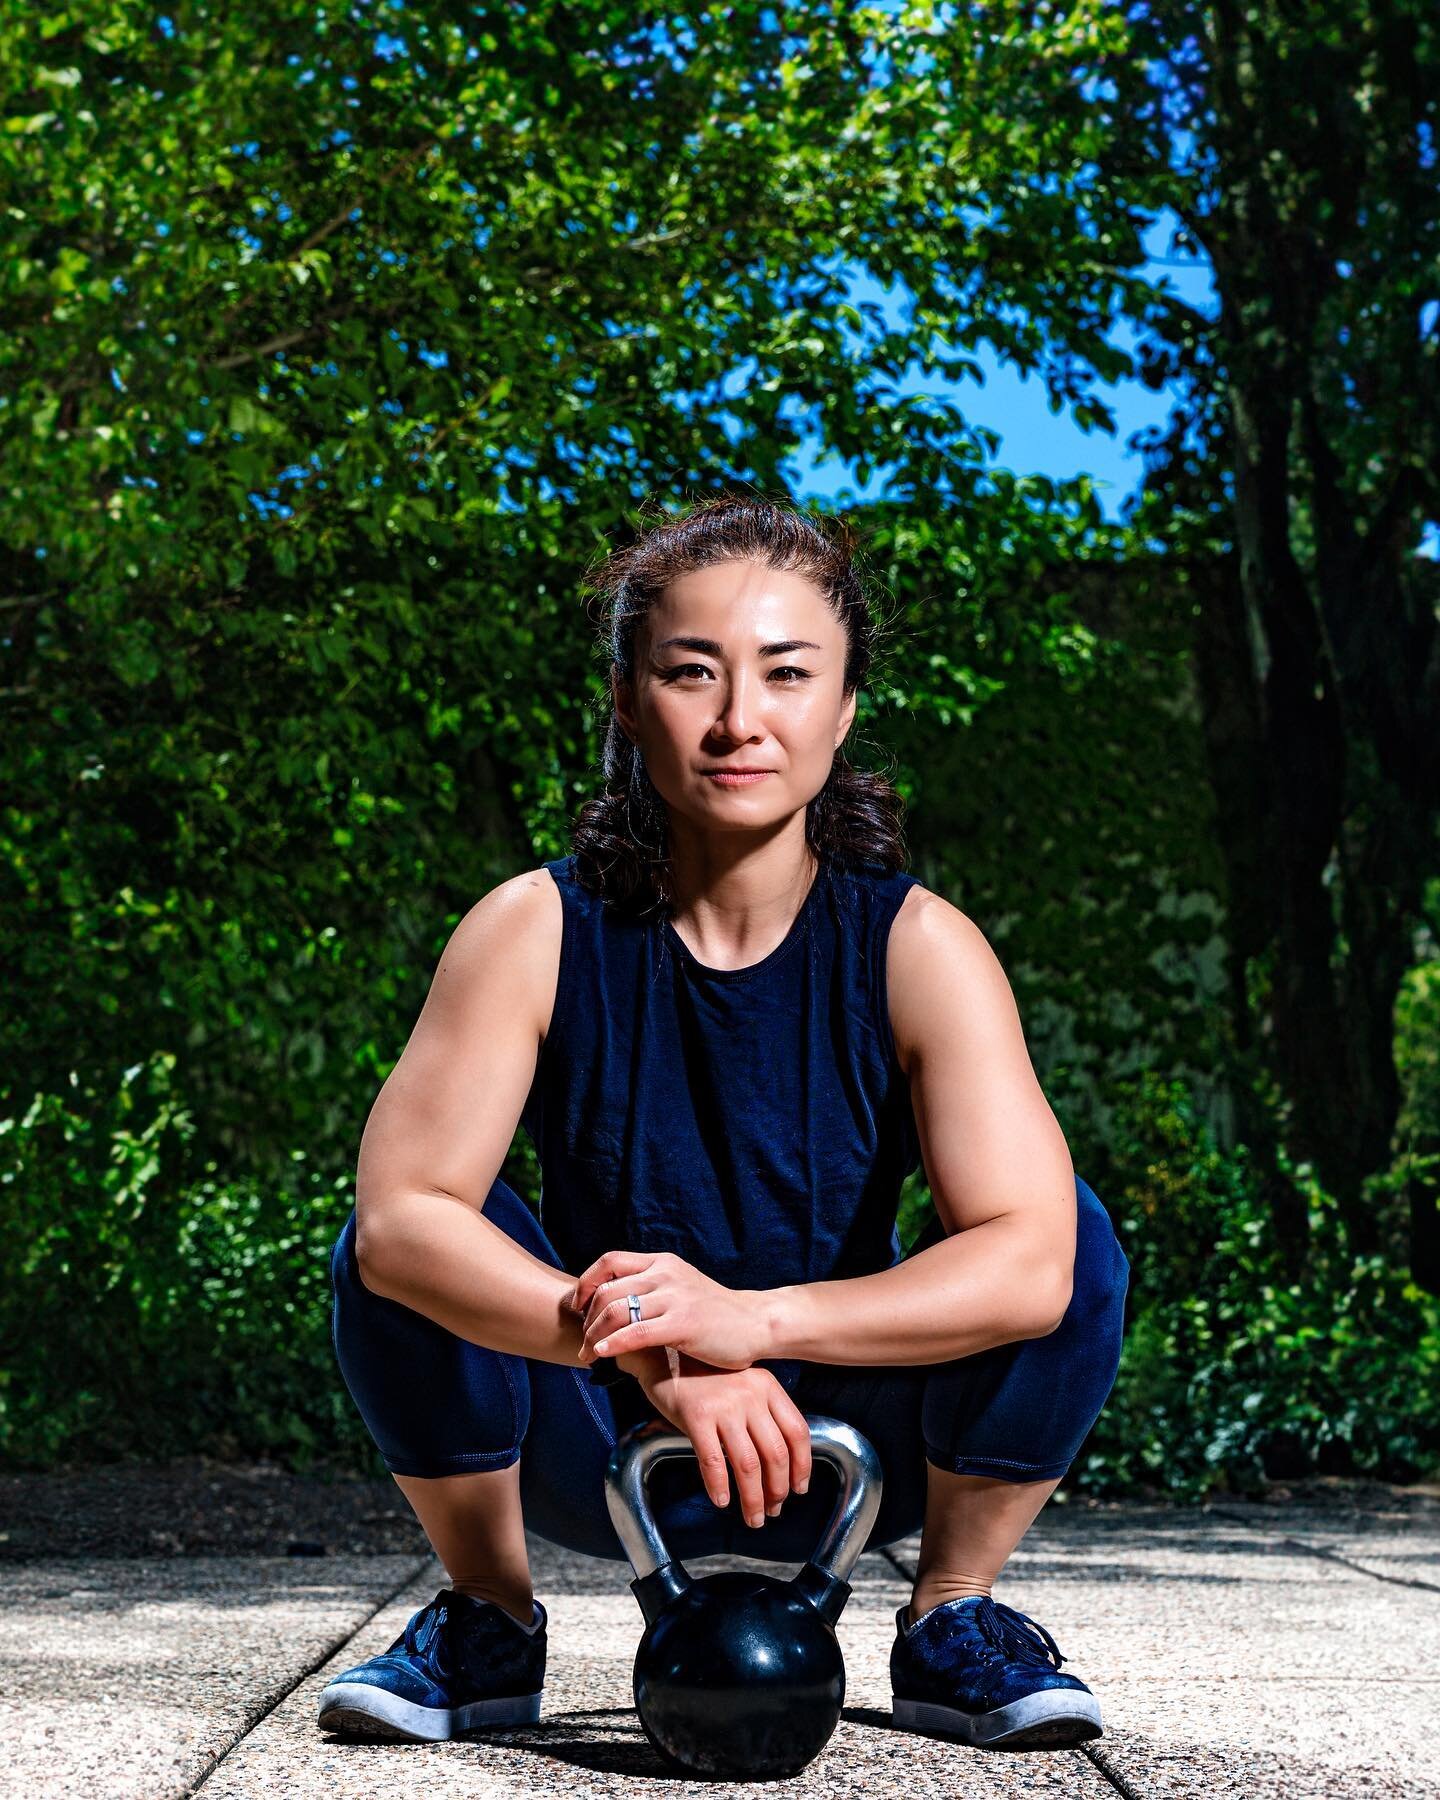 This Evanston personal trainer is ready when you are! She is a pro and will meet you where you&rsquo;re at and help you level up. #evanston #evanstonpersonaltrainer @train_with_young